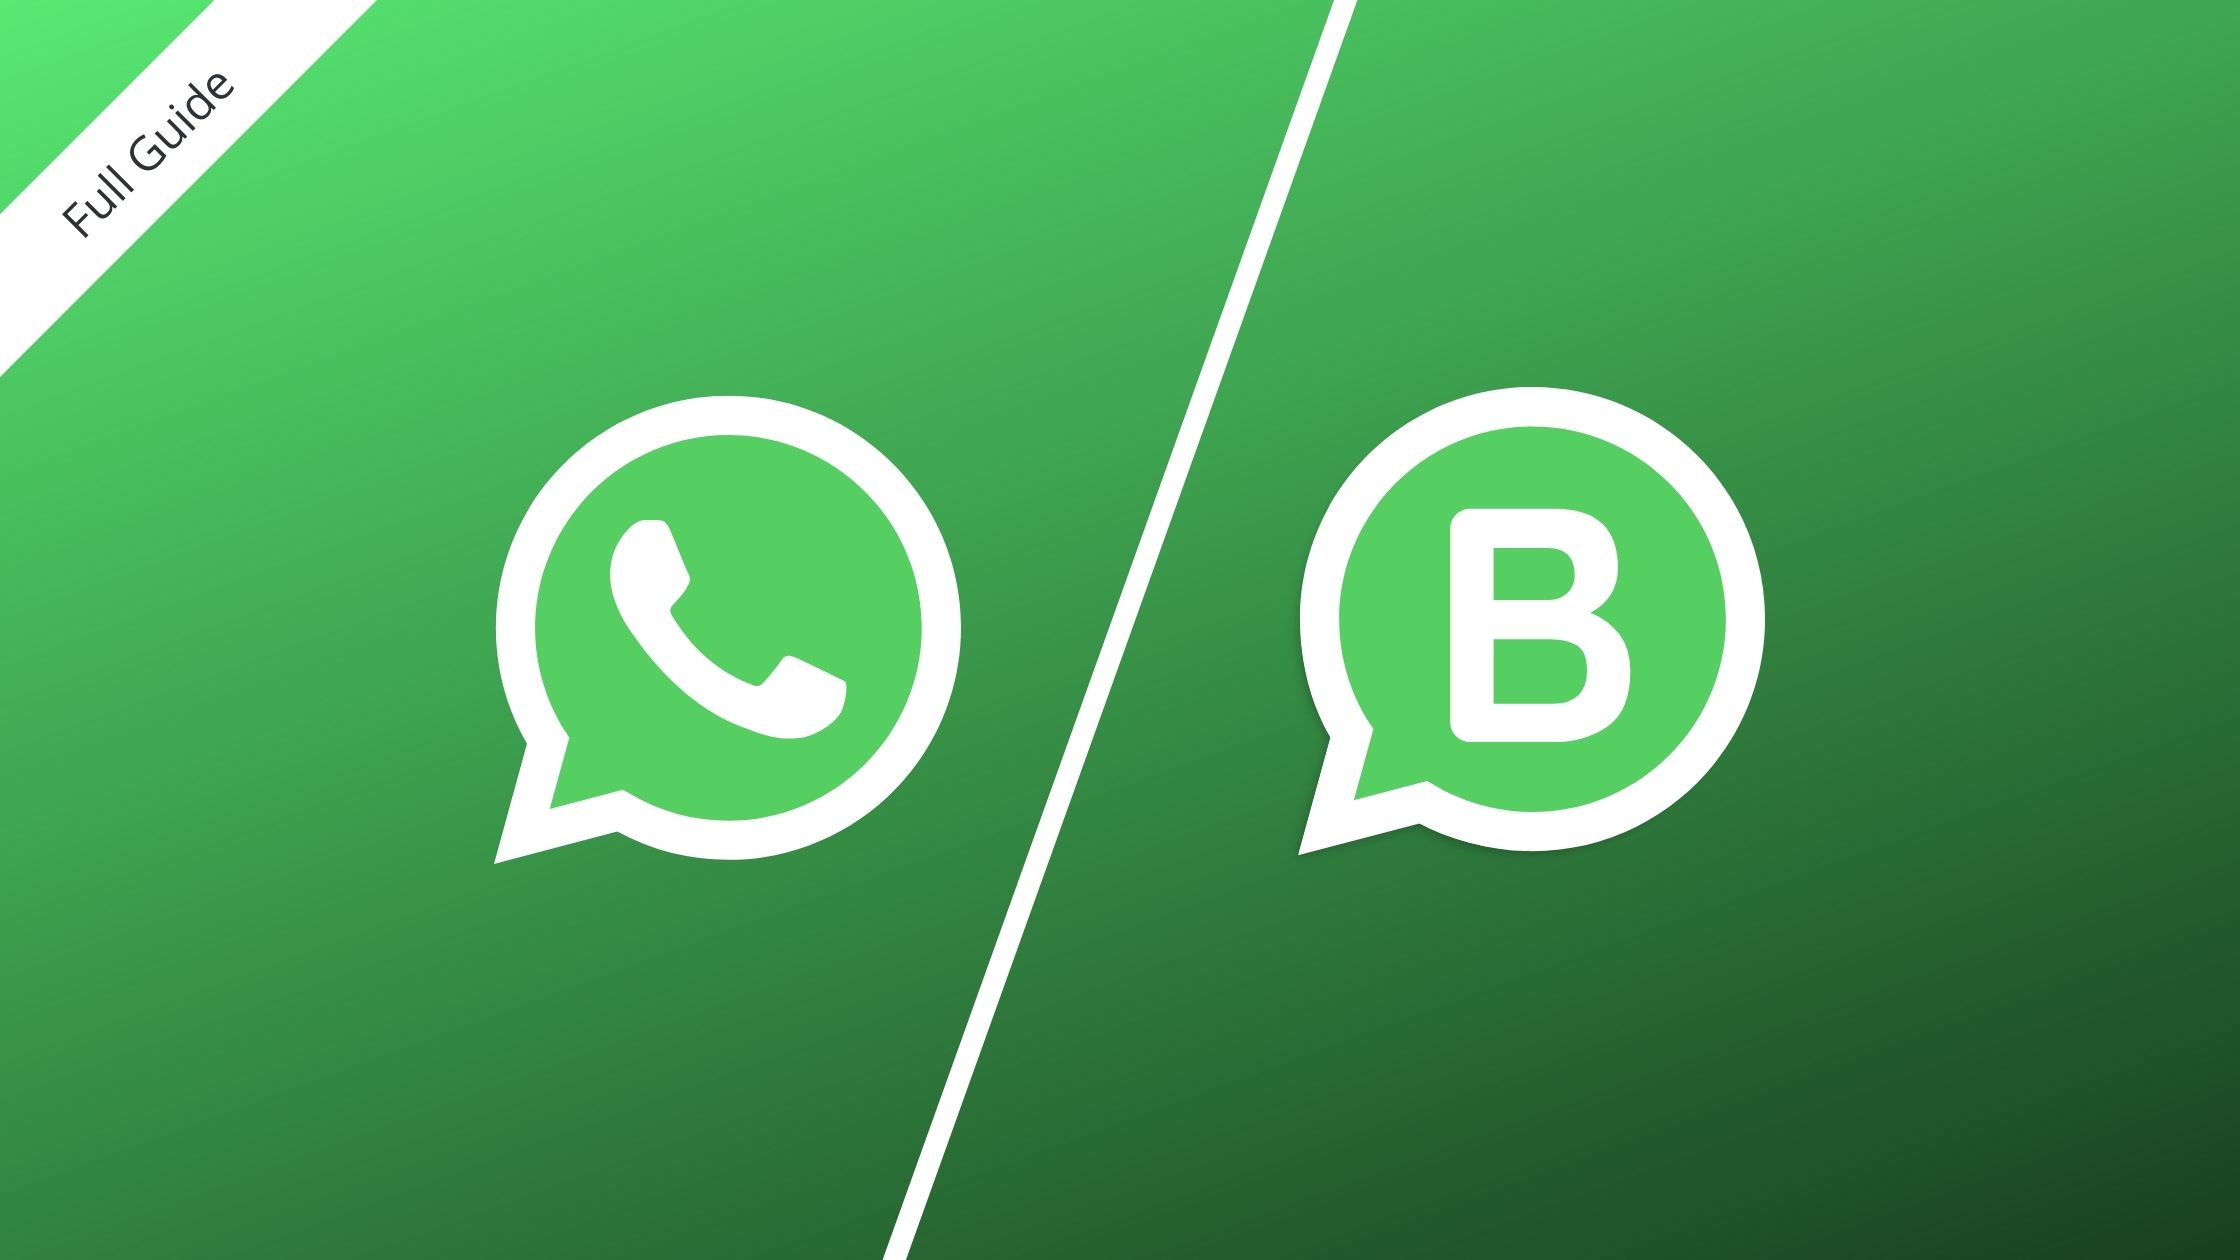 Difference Between WhatsApp and WhatsApp Business